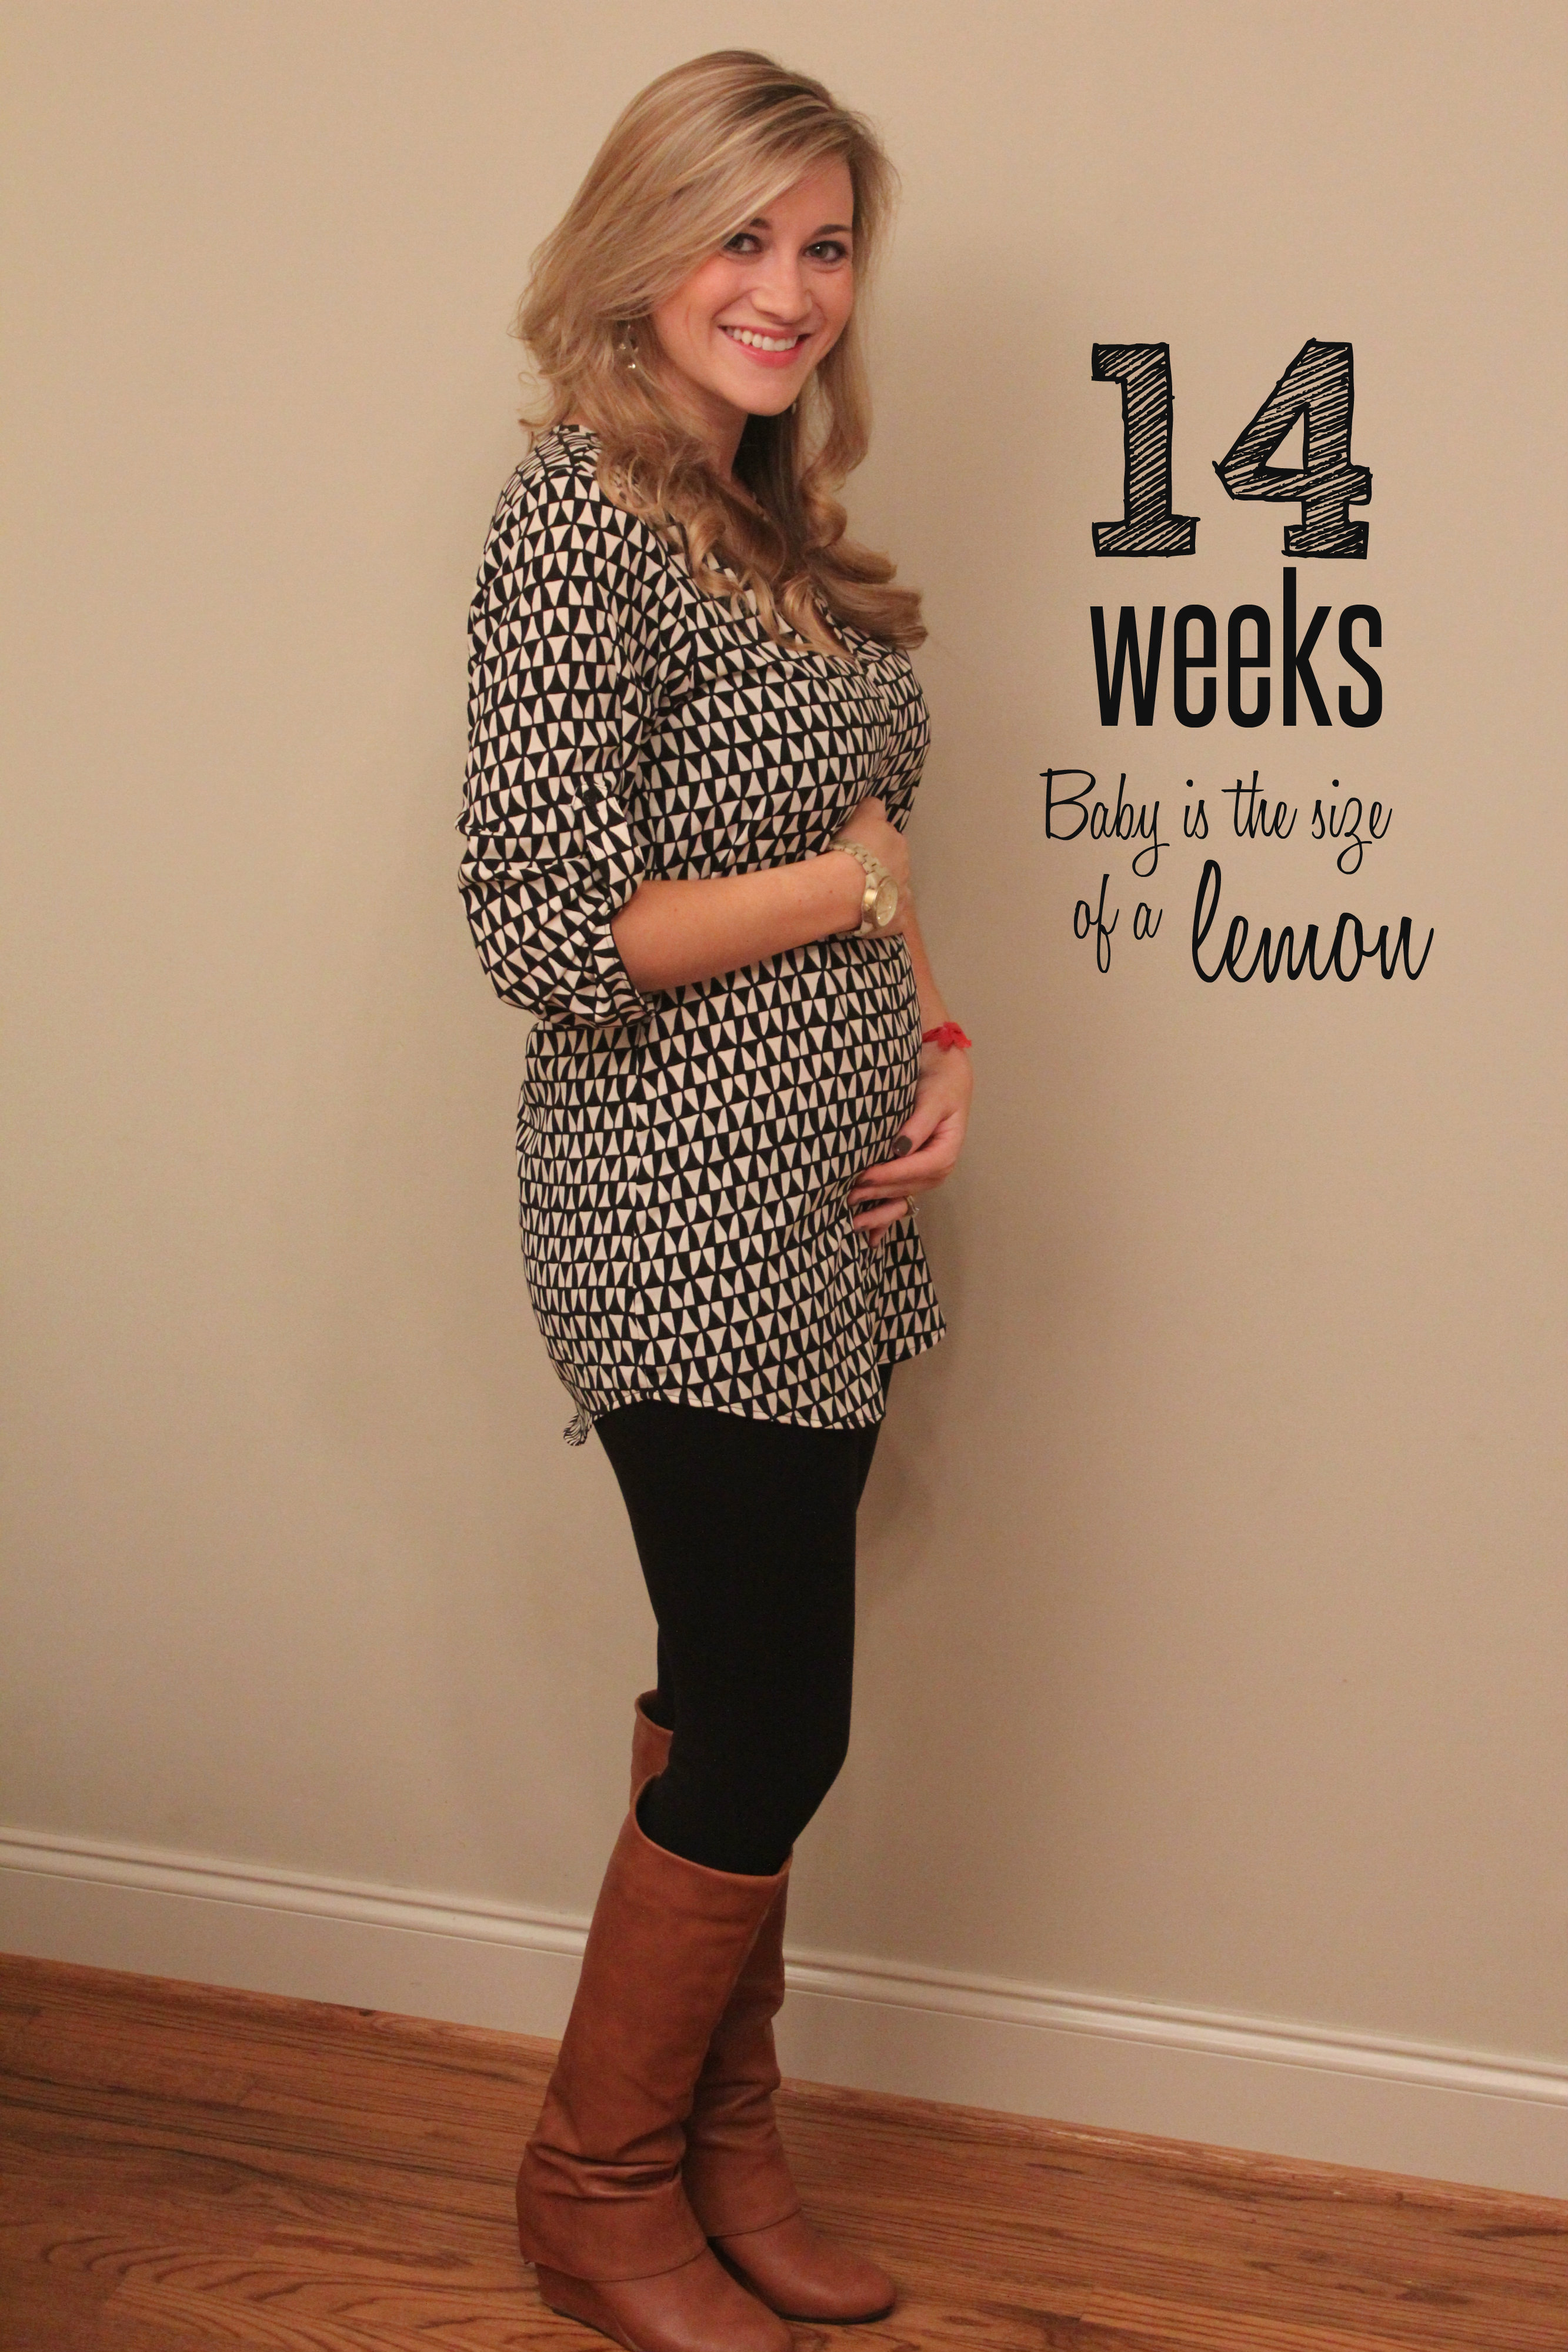 14 Weeks Baby Girl Development: What to Expect?